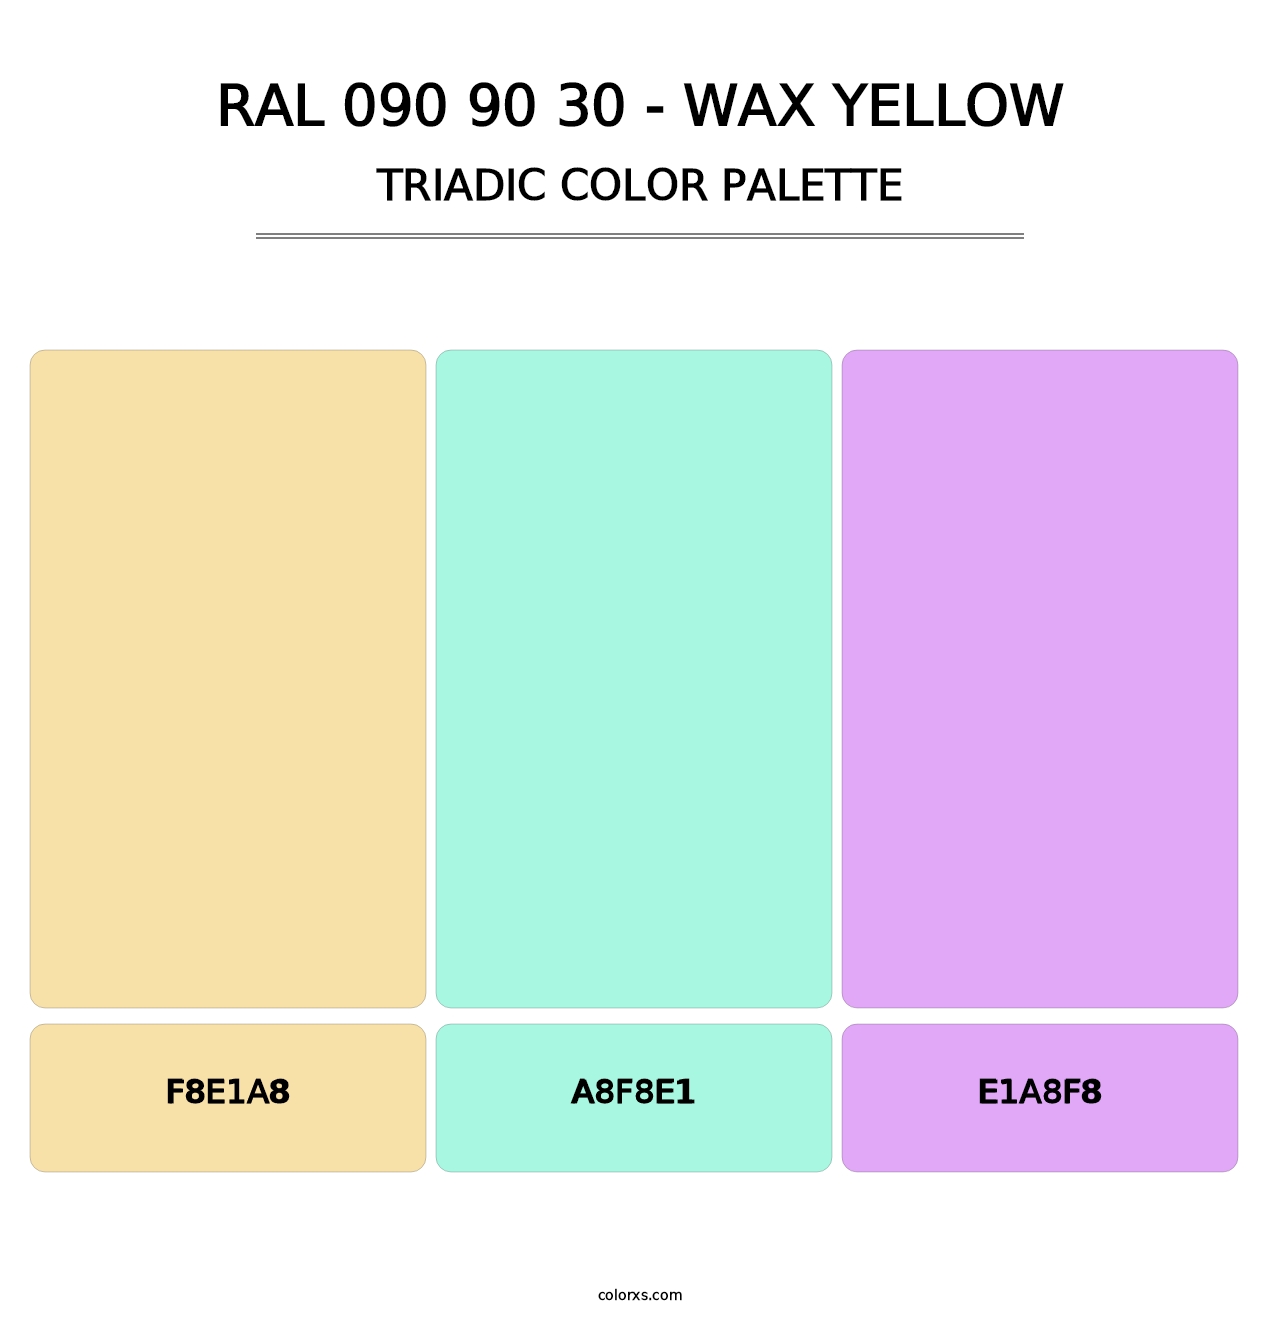 RAL 090 90 30 - Wax Yellow - Triadic Color Palette